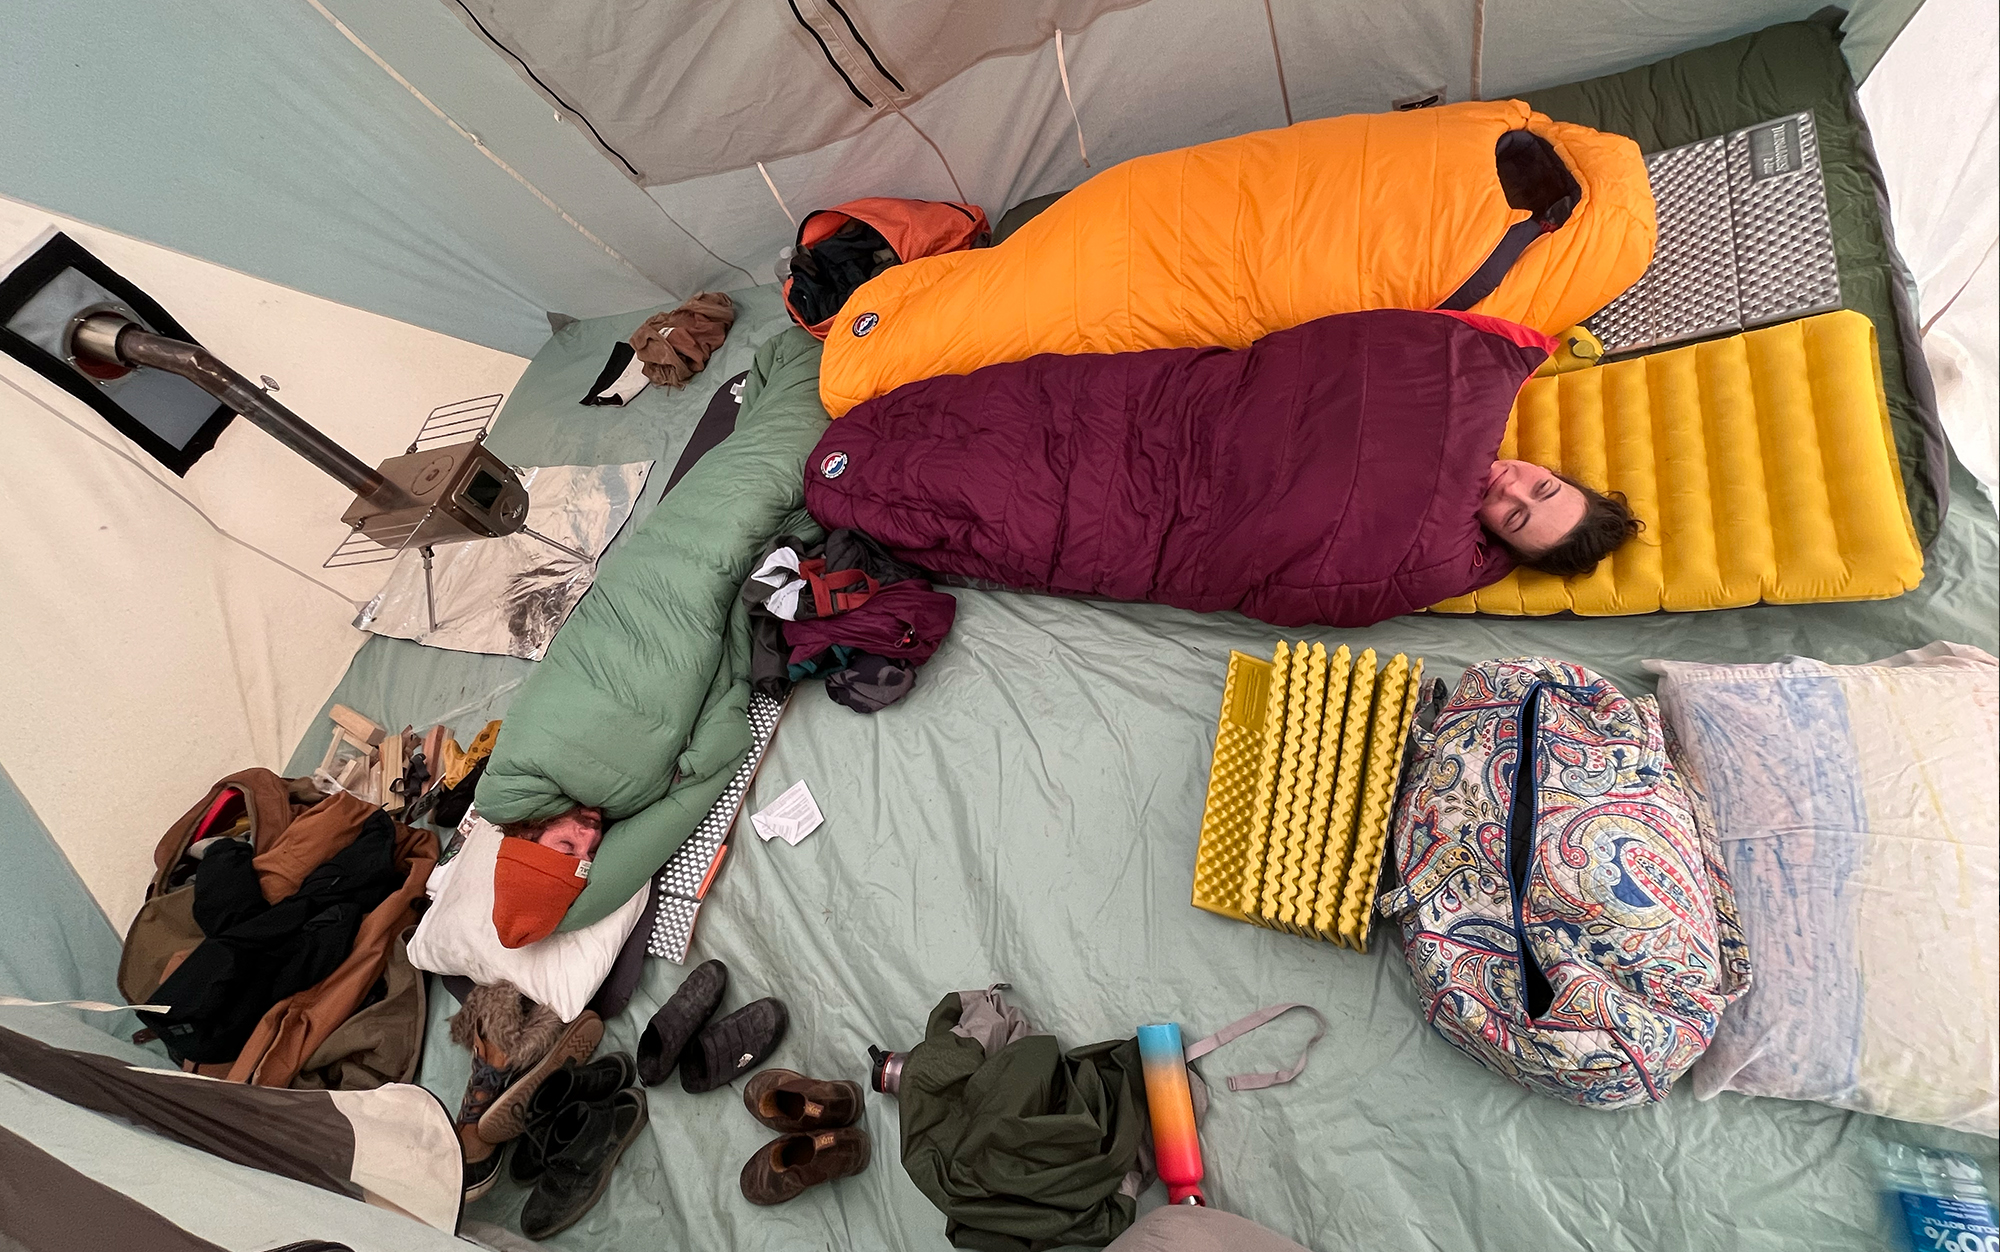 Four adults sprawled out lavishly inside this 140-square-foot tent.